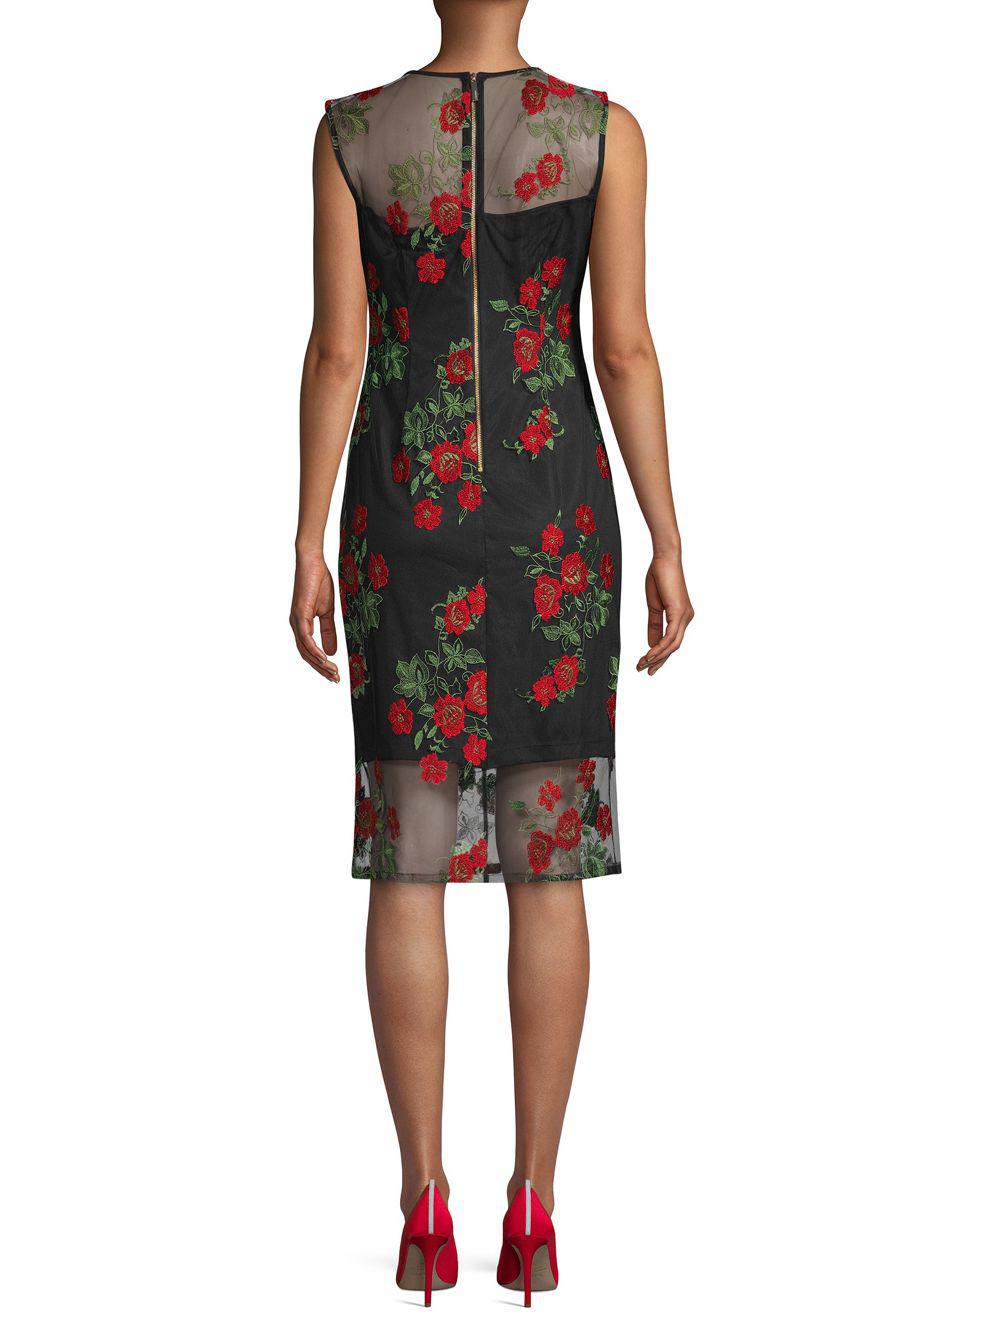 Calvin Klein Black Dress With Red Flowers new Zealand, SAVE 32 